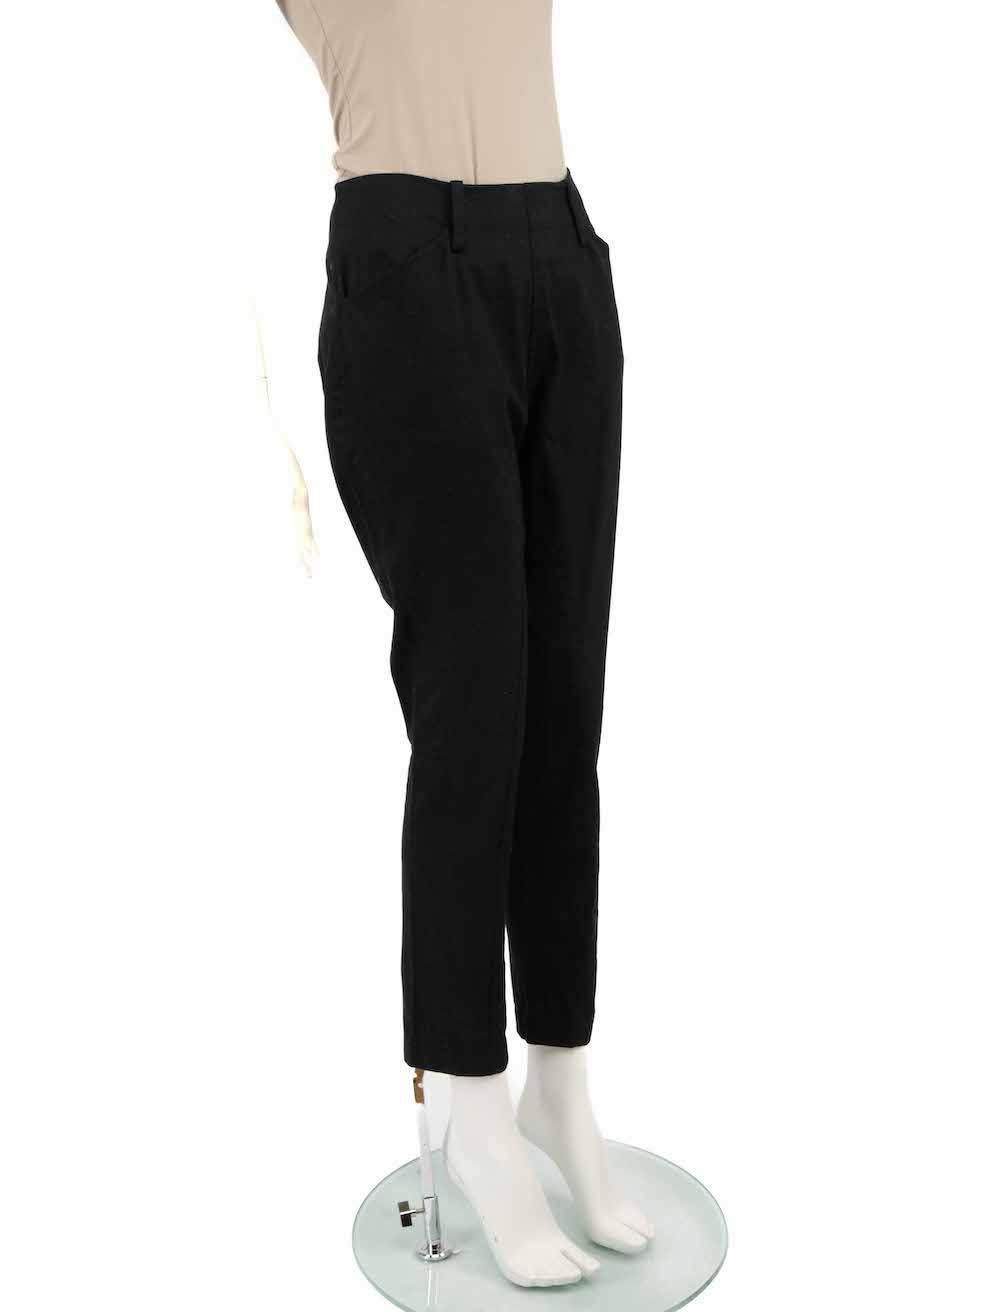 CONDITION is Very good. Hardly any visible wear to trouser is evident on this used Yohji Yamamoto designer resale item.
 
 
 
 Details
 
 
 Black
 
 Cotton
 
 Trousers
 
 Slim fit
 
 Mid rise
 
 2x Side pockets
 
 Side zip and hook fastening
 
 
 
